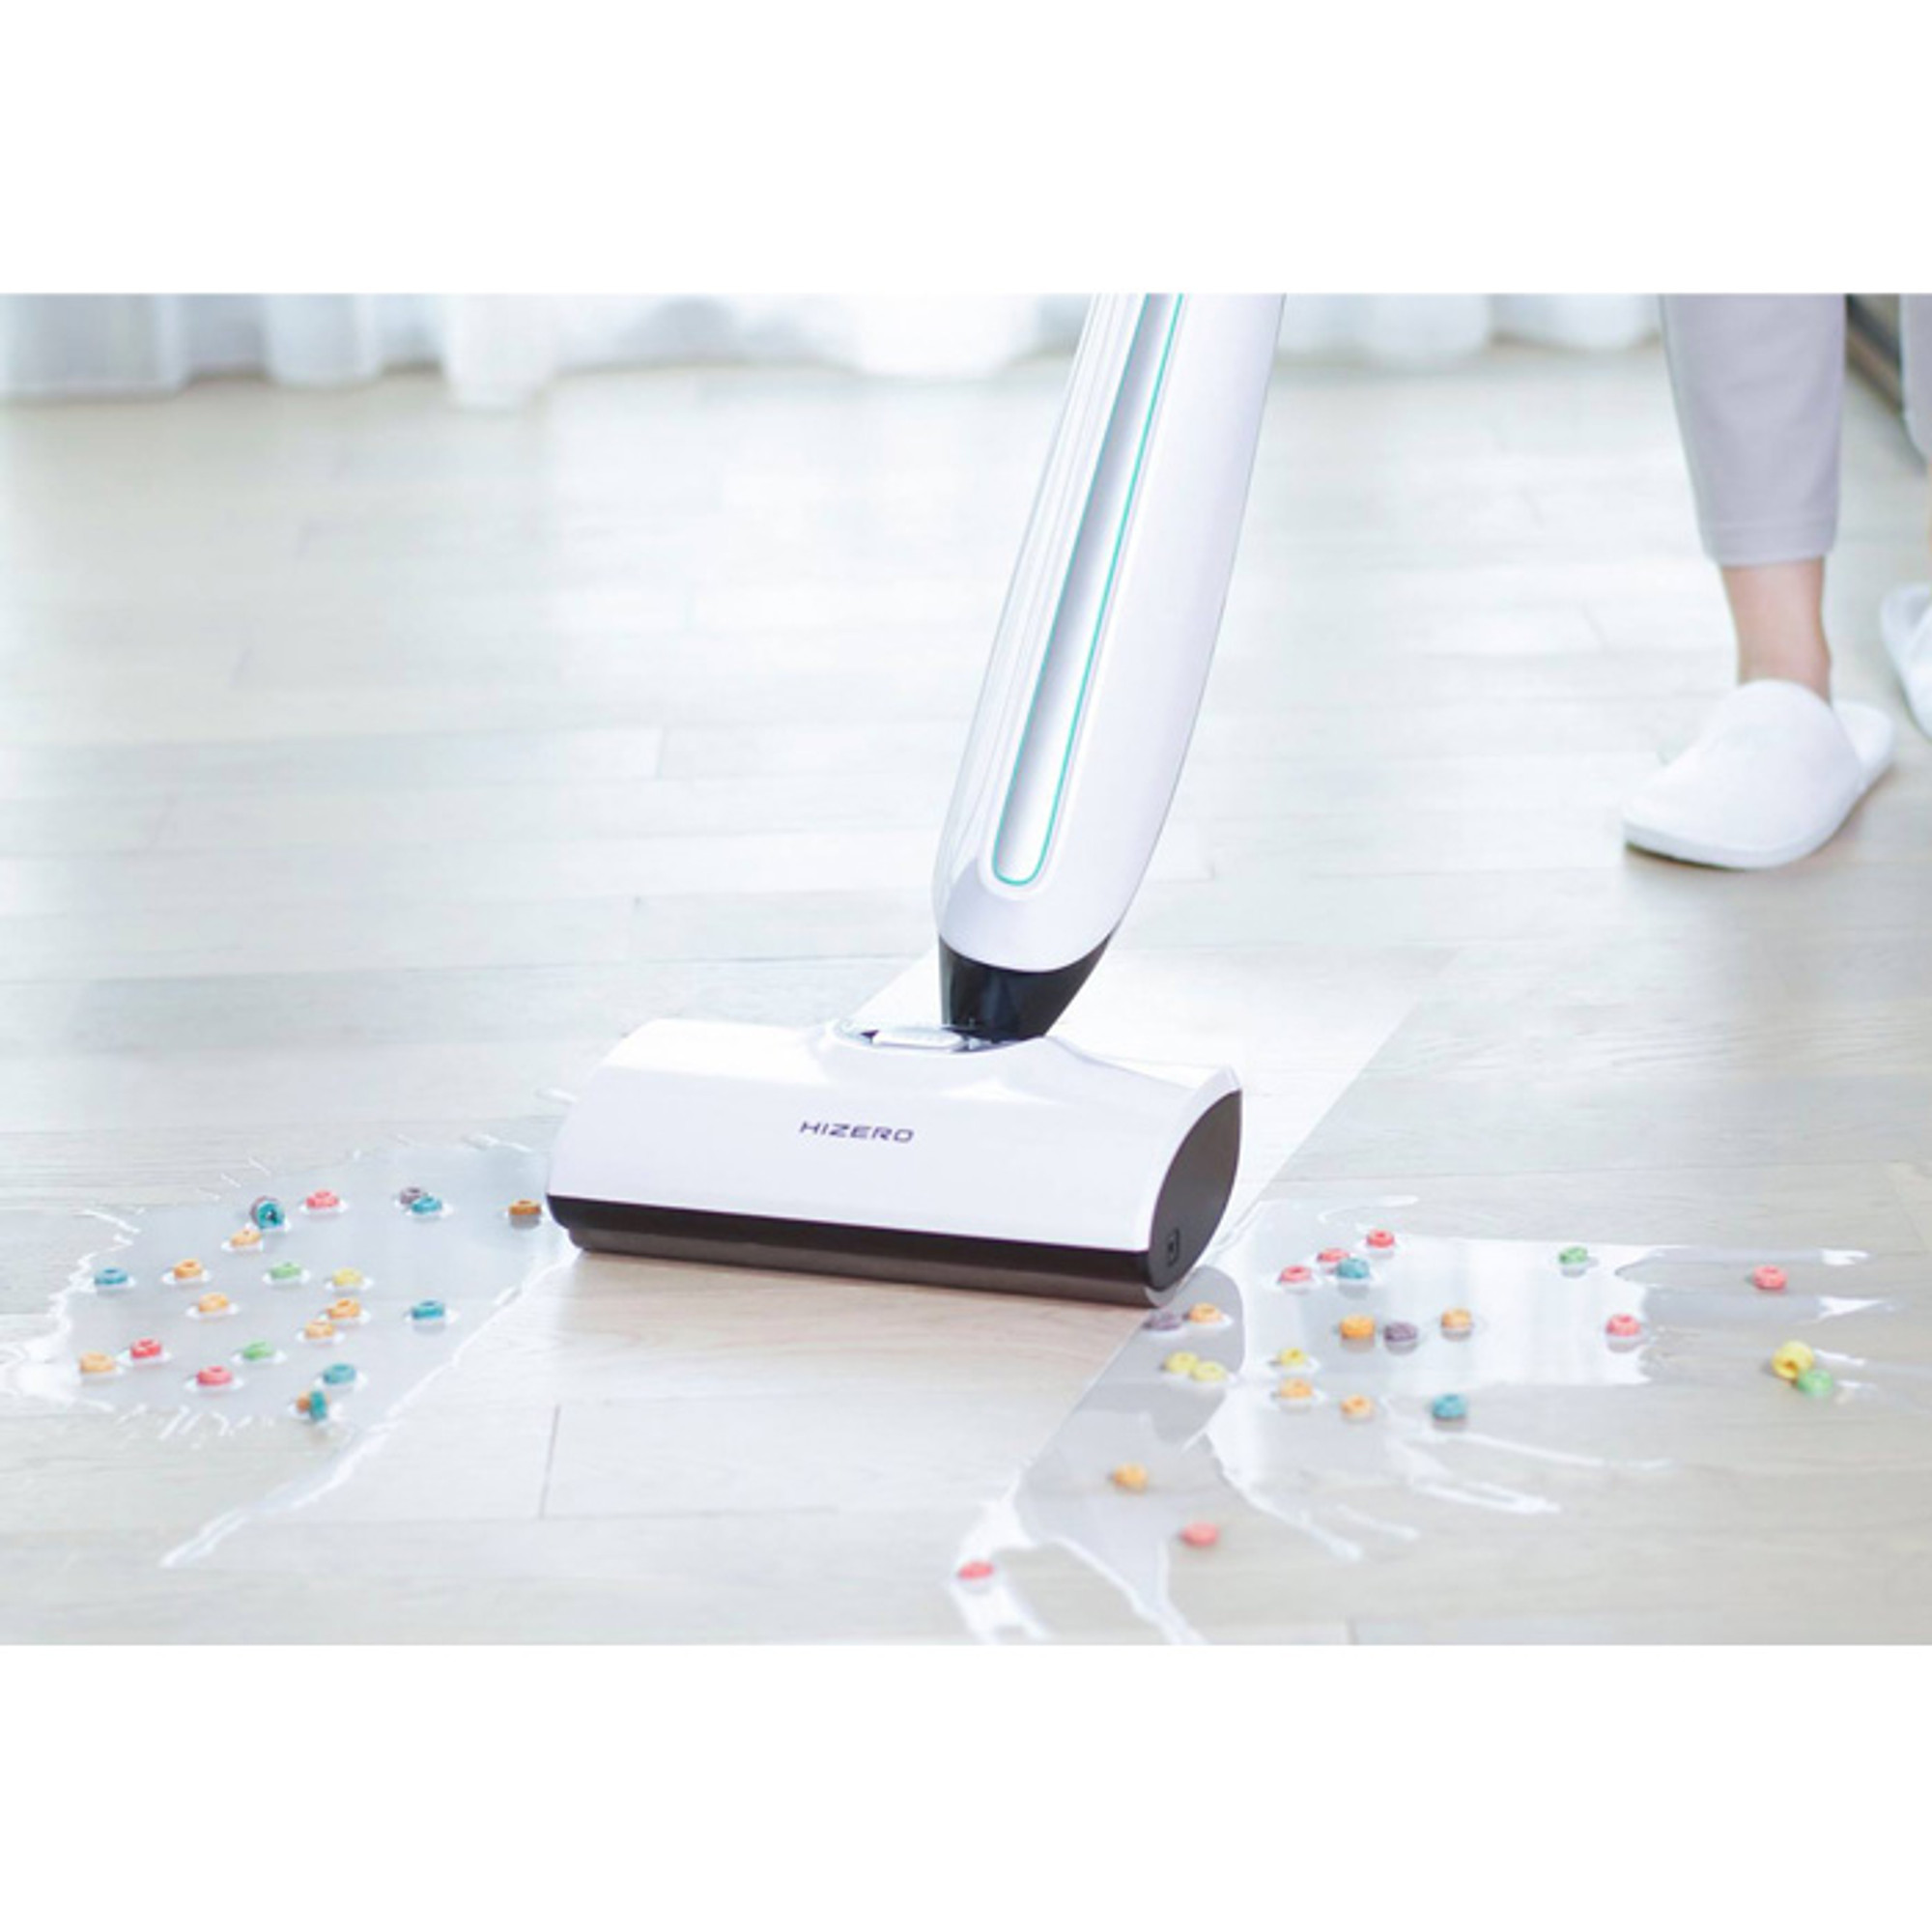 Buy Hizero F801 Bionic Hard Floor Cleaner From Canada At